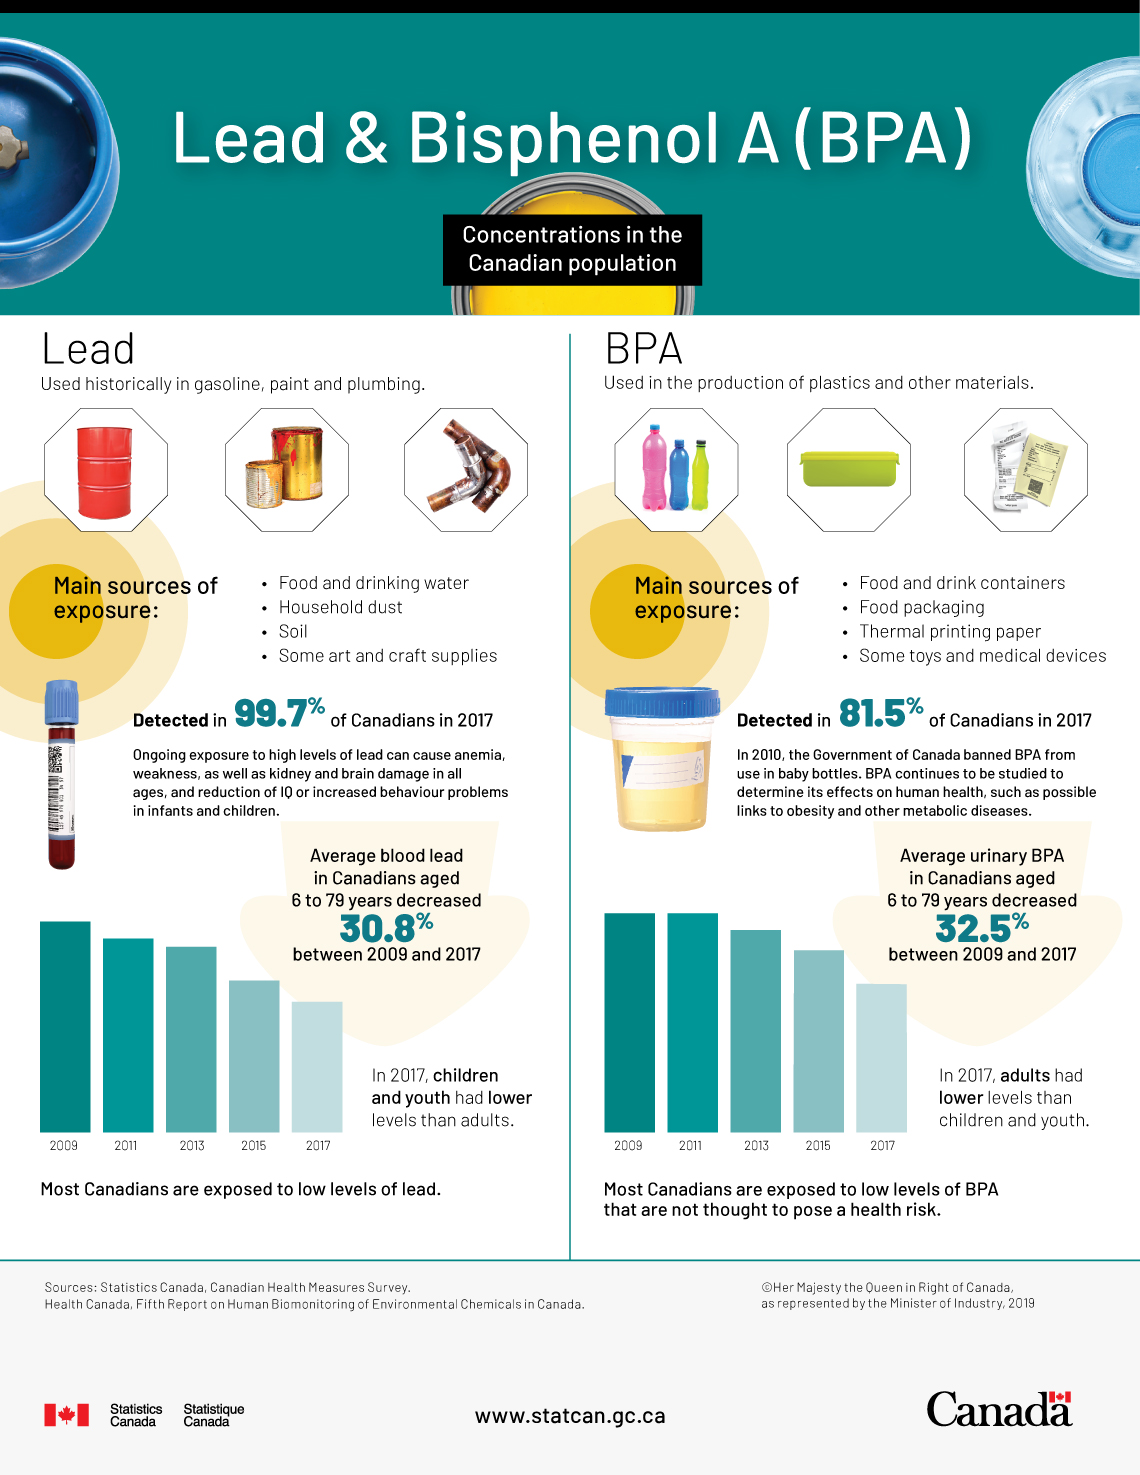 Infographic: Lead and bisphenol A (BPA) concentrations in the Canadian population